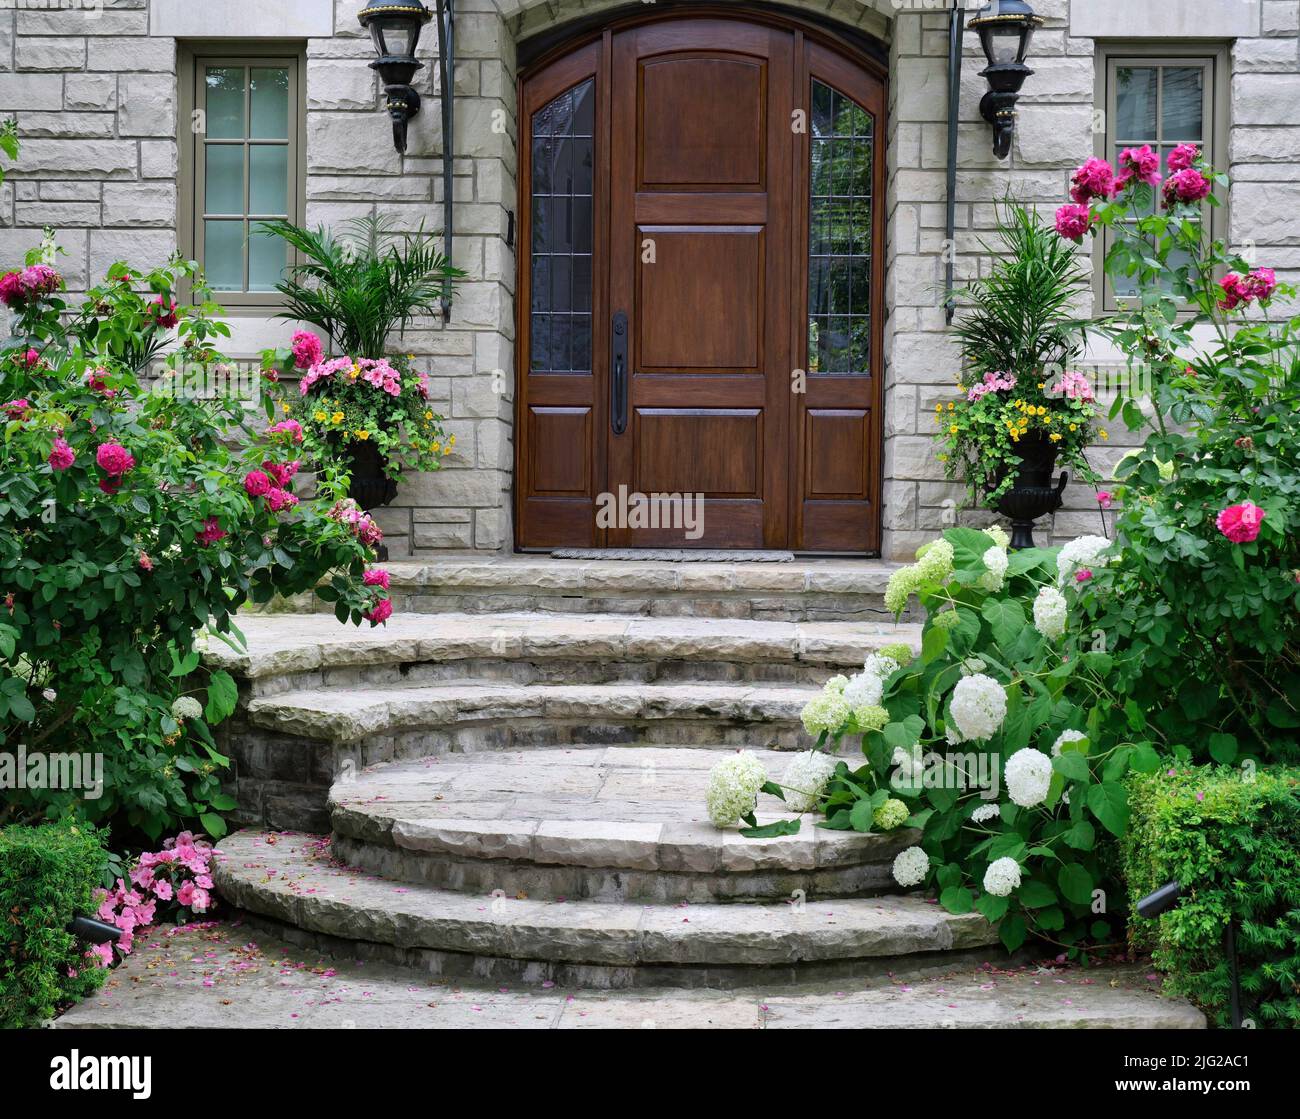 Home entrance with elegant wooden front door surrounded by beautiful flowers Stock Photo